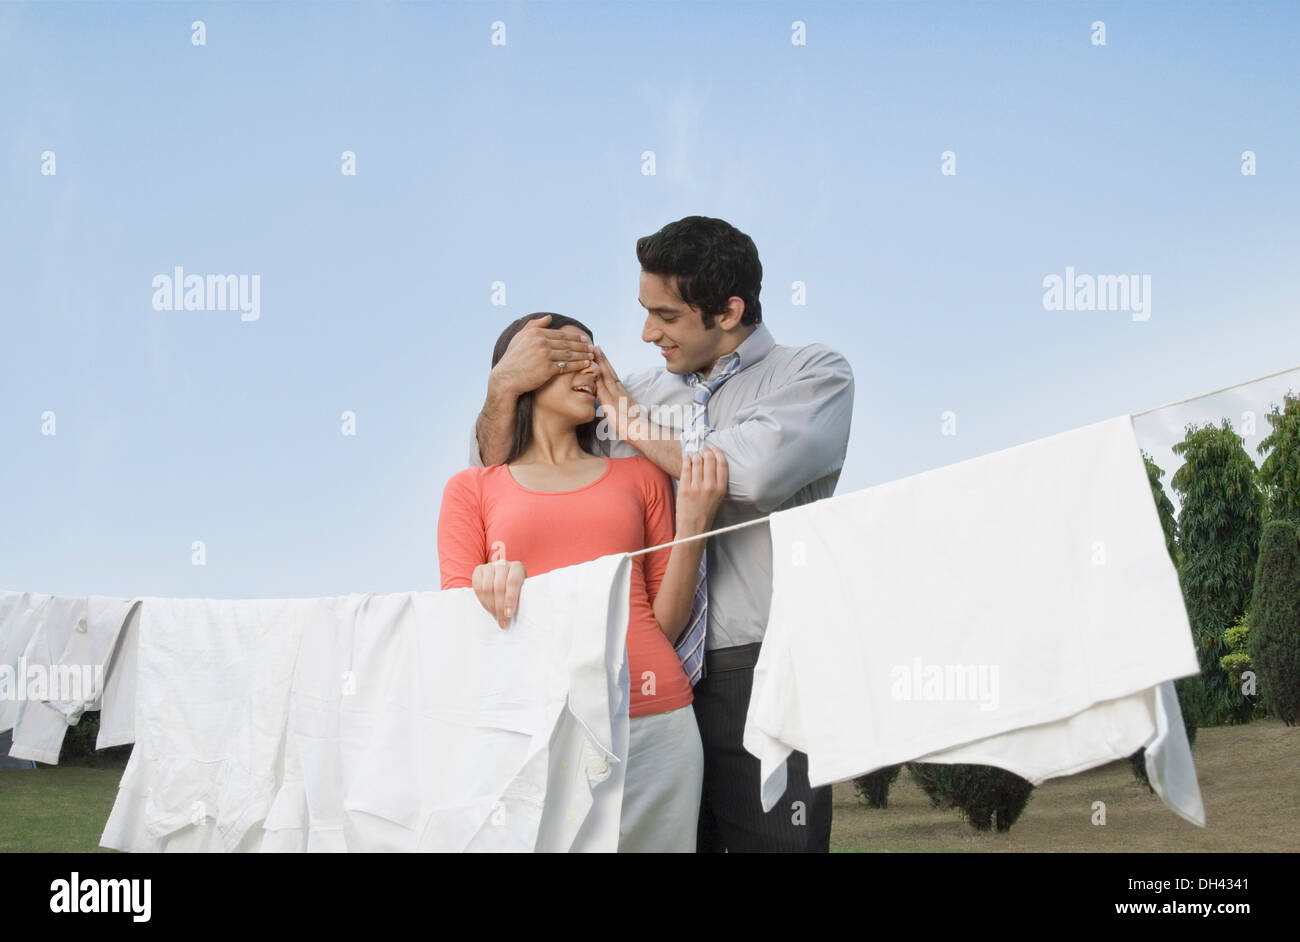 Man covering woman's eyes and smiling Stock Photo